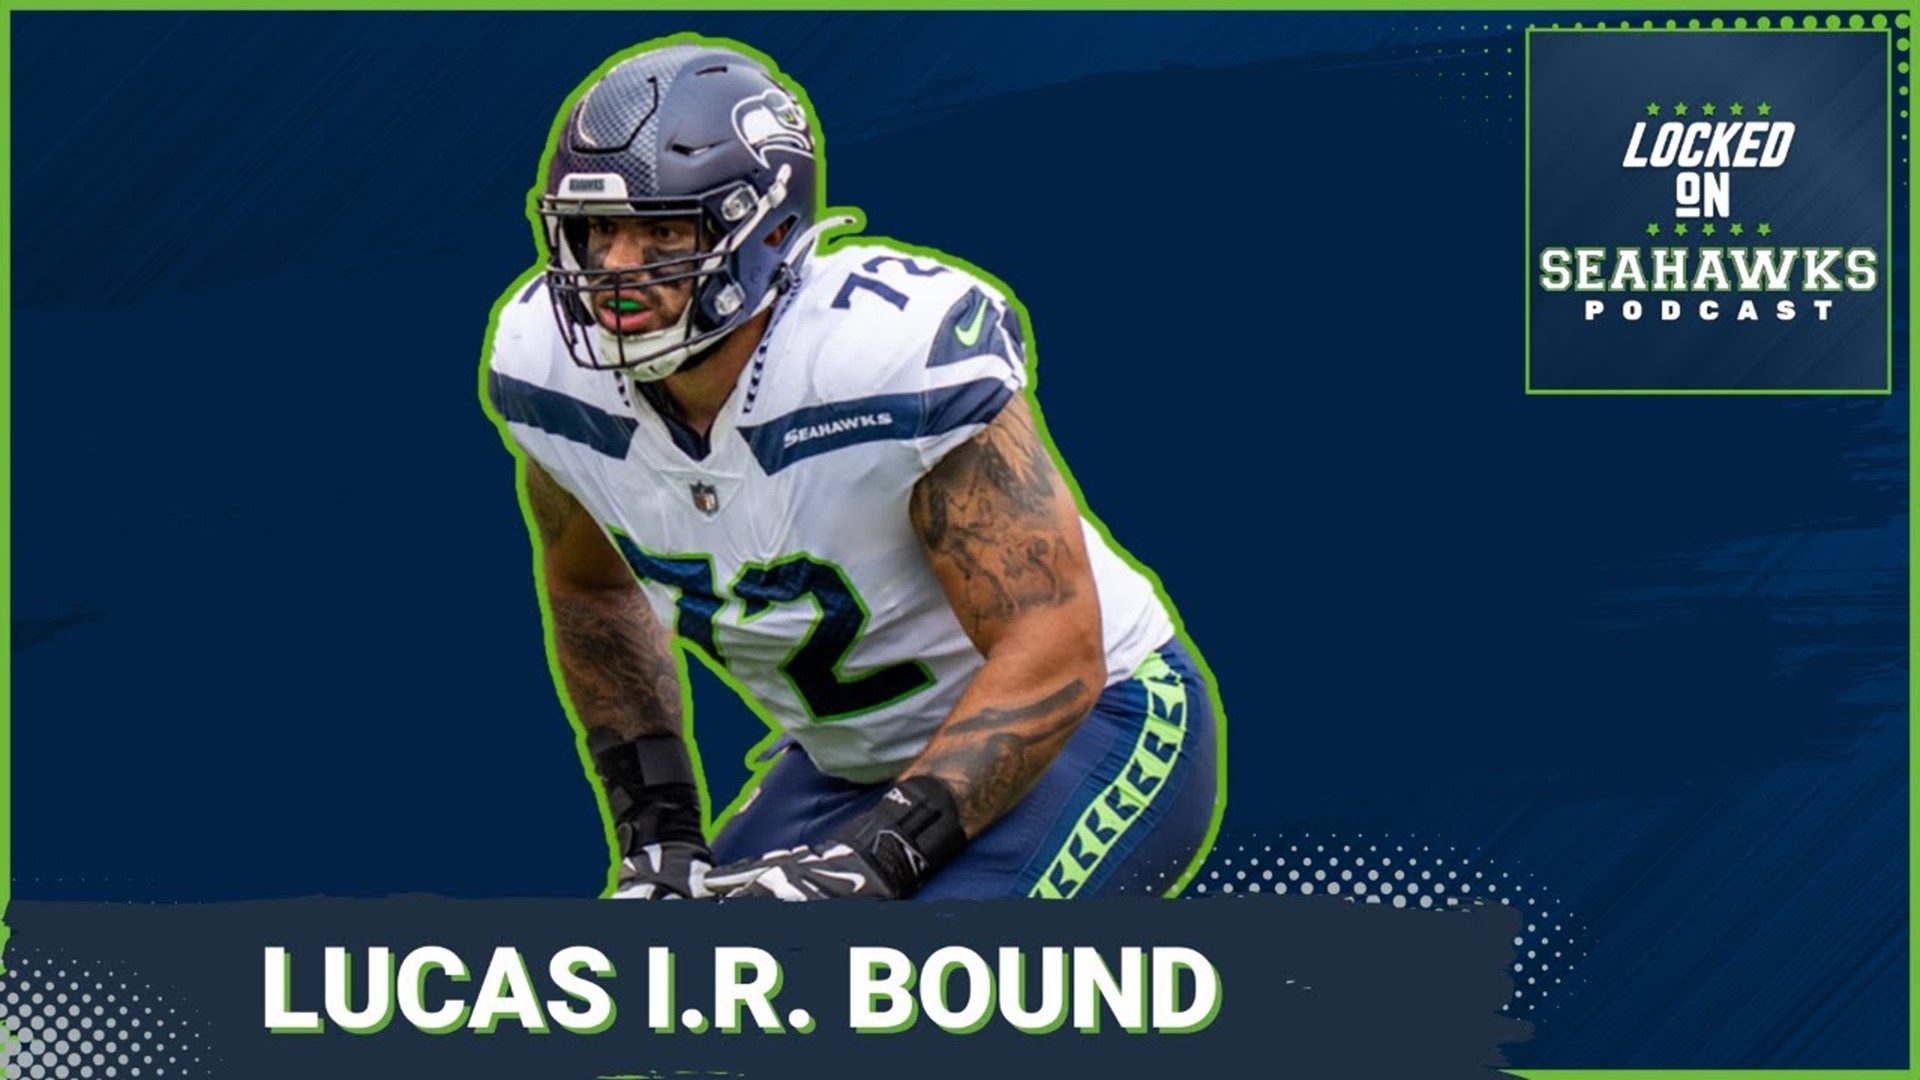 Making a bad situation along the offensive line even worse, the Seahawks placed hurting right tackle Abraham Lucas on injured reserve